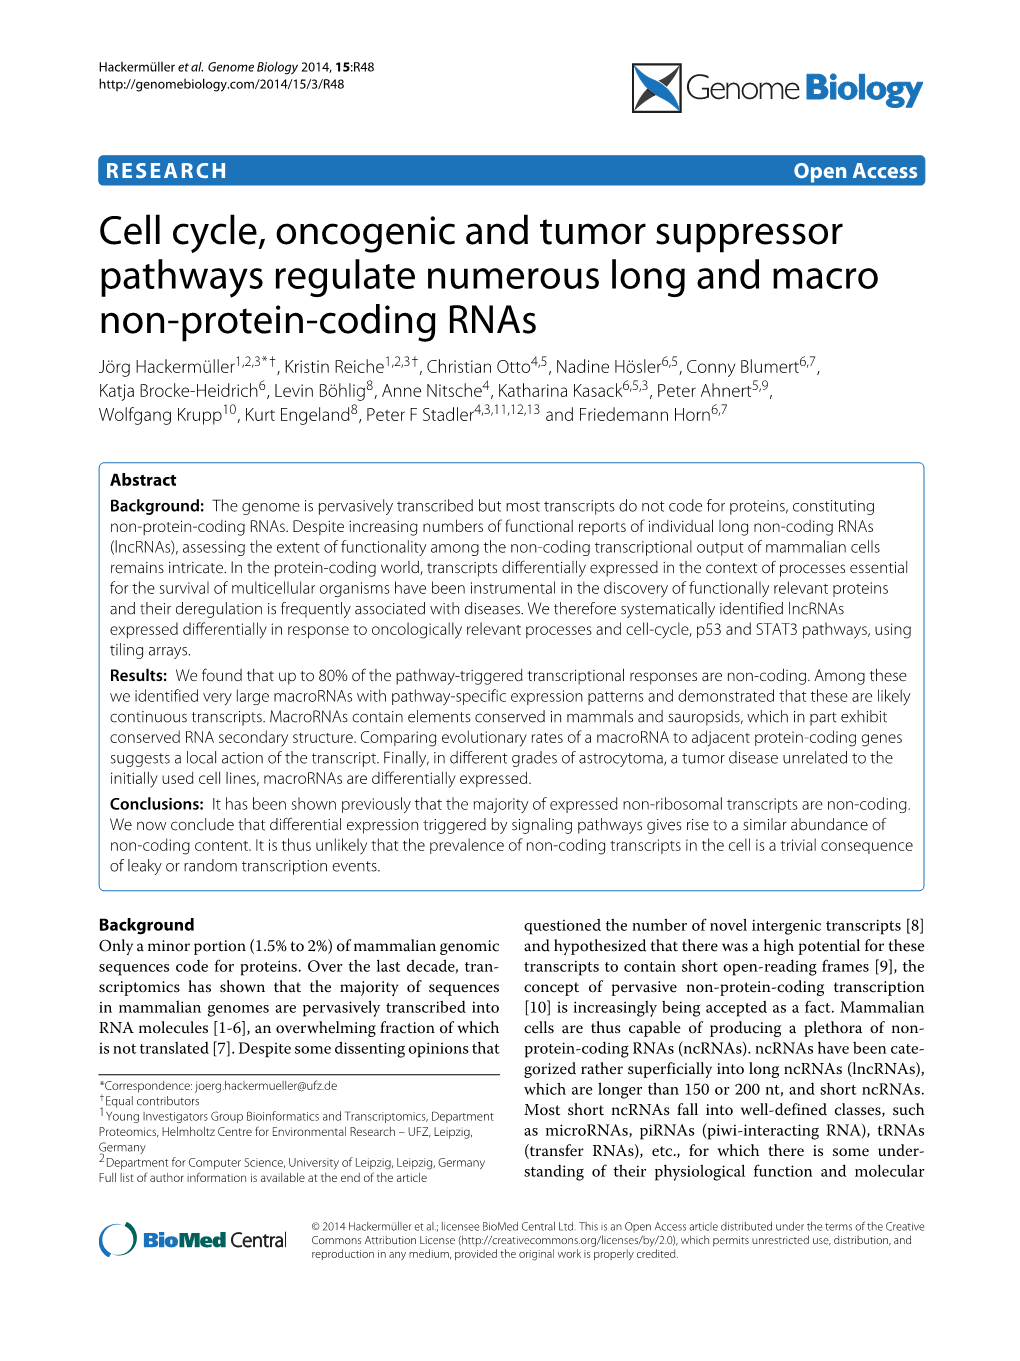 Cell Cycle, Oncogenic and Tumor Suppressor Pathways Regulate Numerous Long and Macro Non-Protein-Coding Rnas